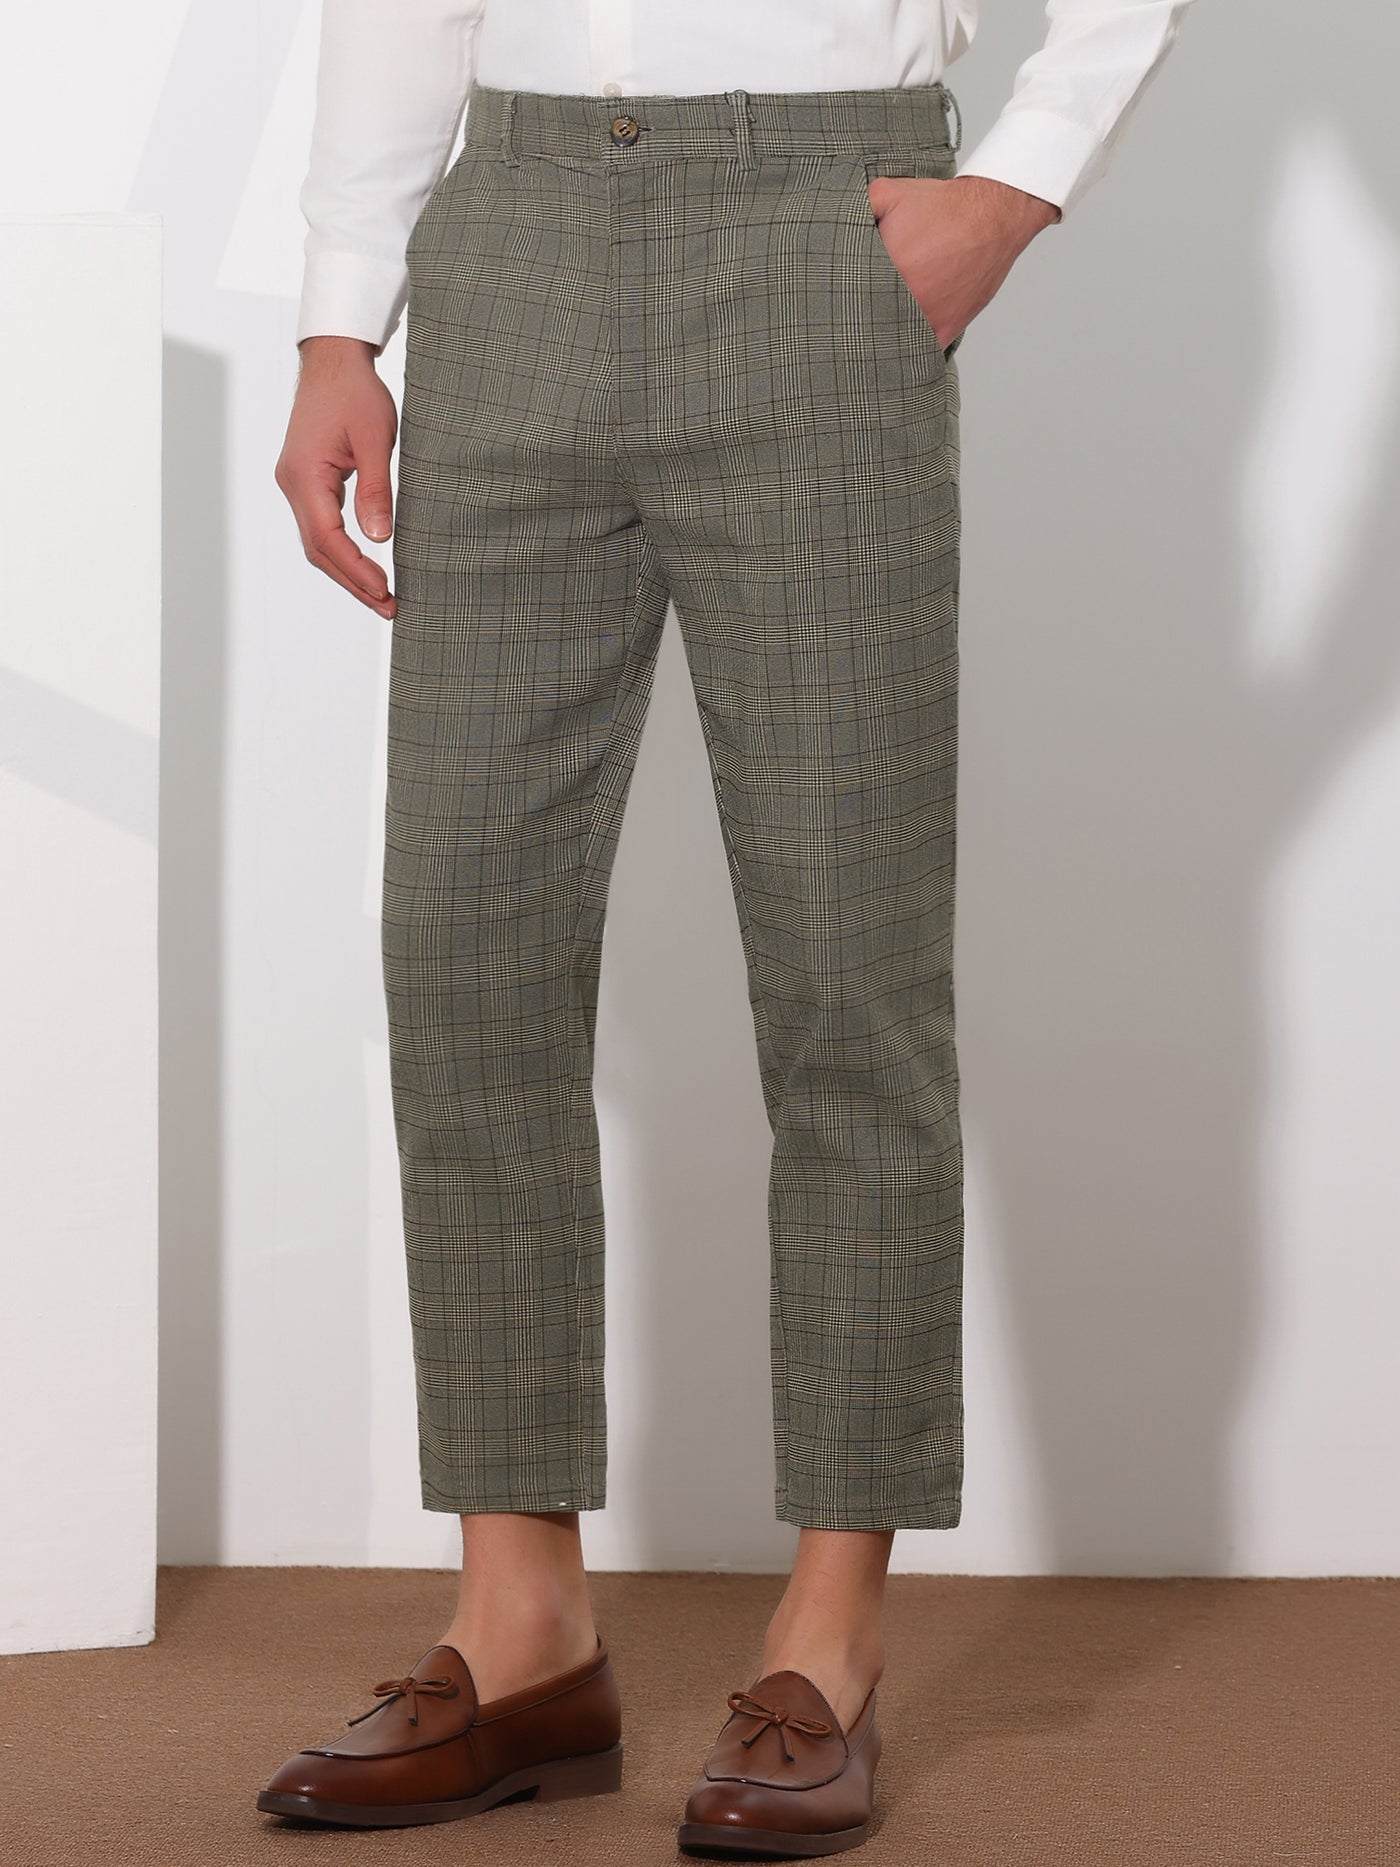 Bublédon Plaid Cropped Flat Front Ankle Length Checked Dress Pants